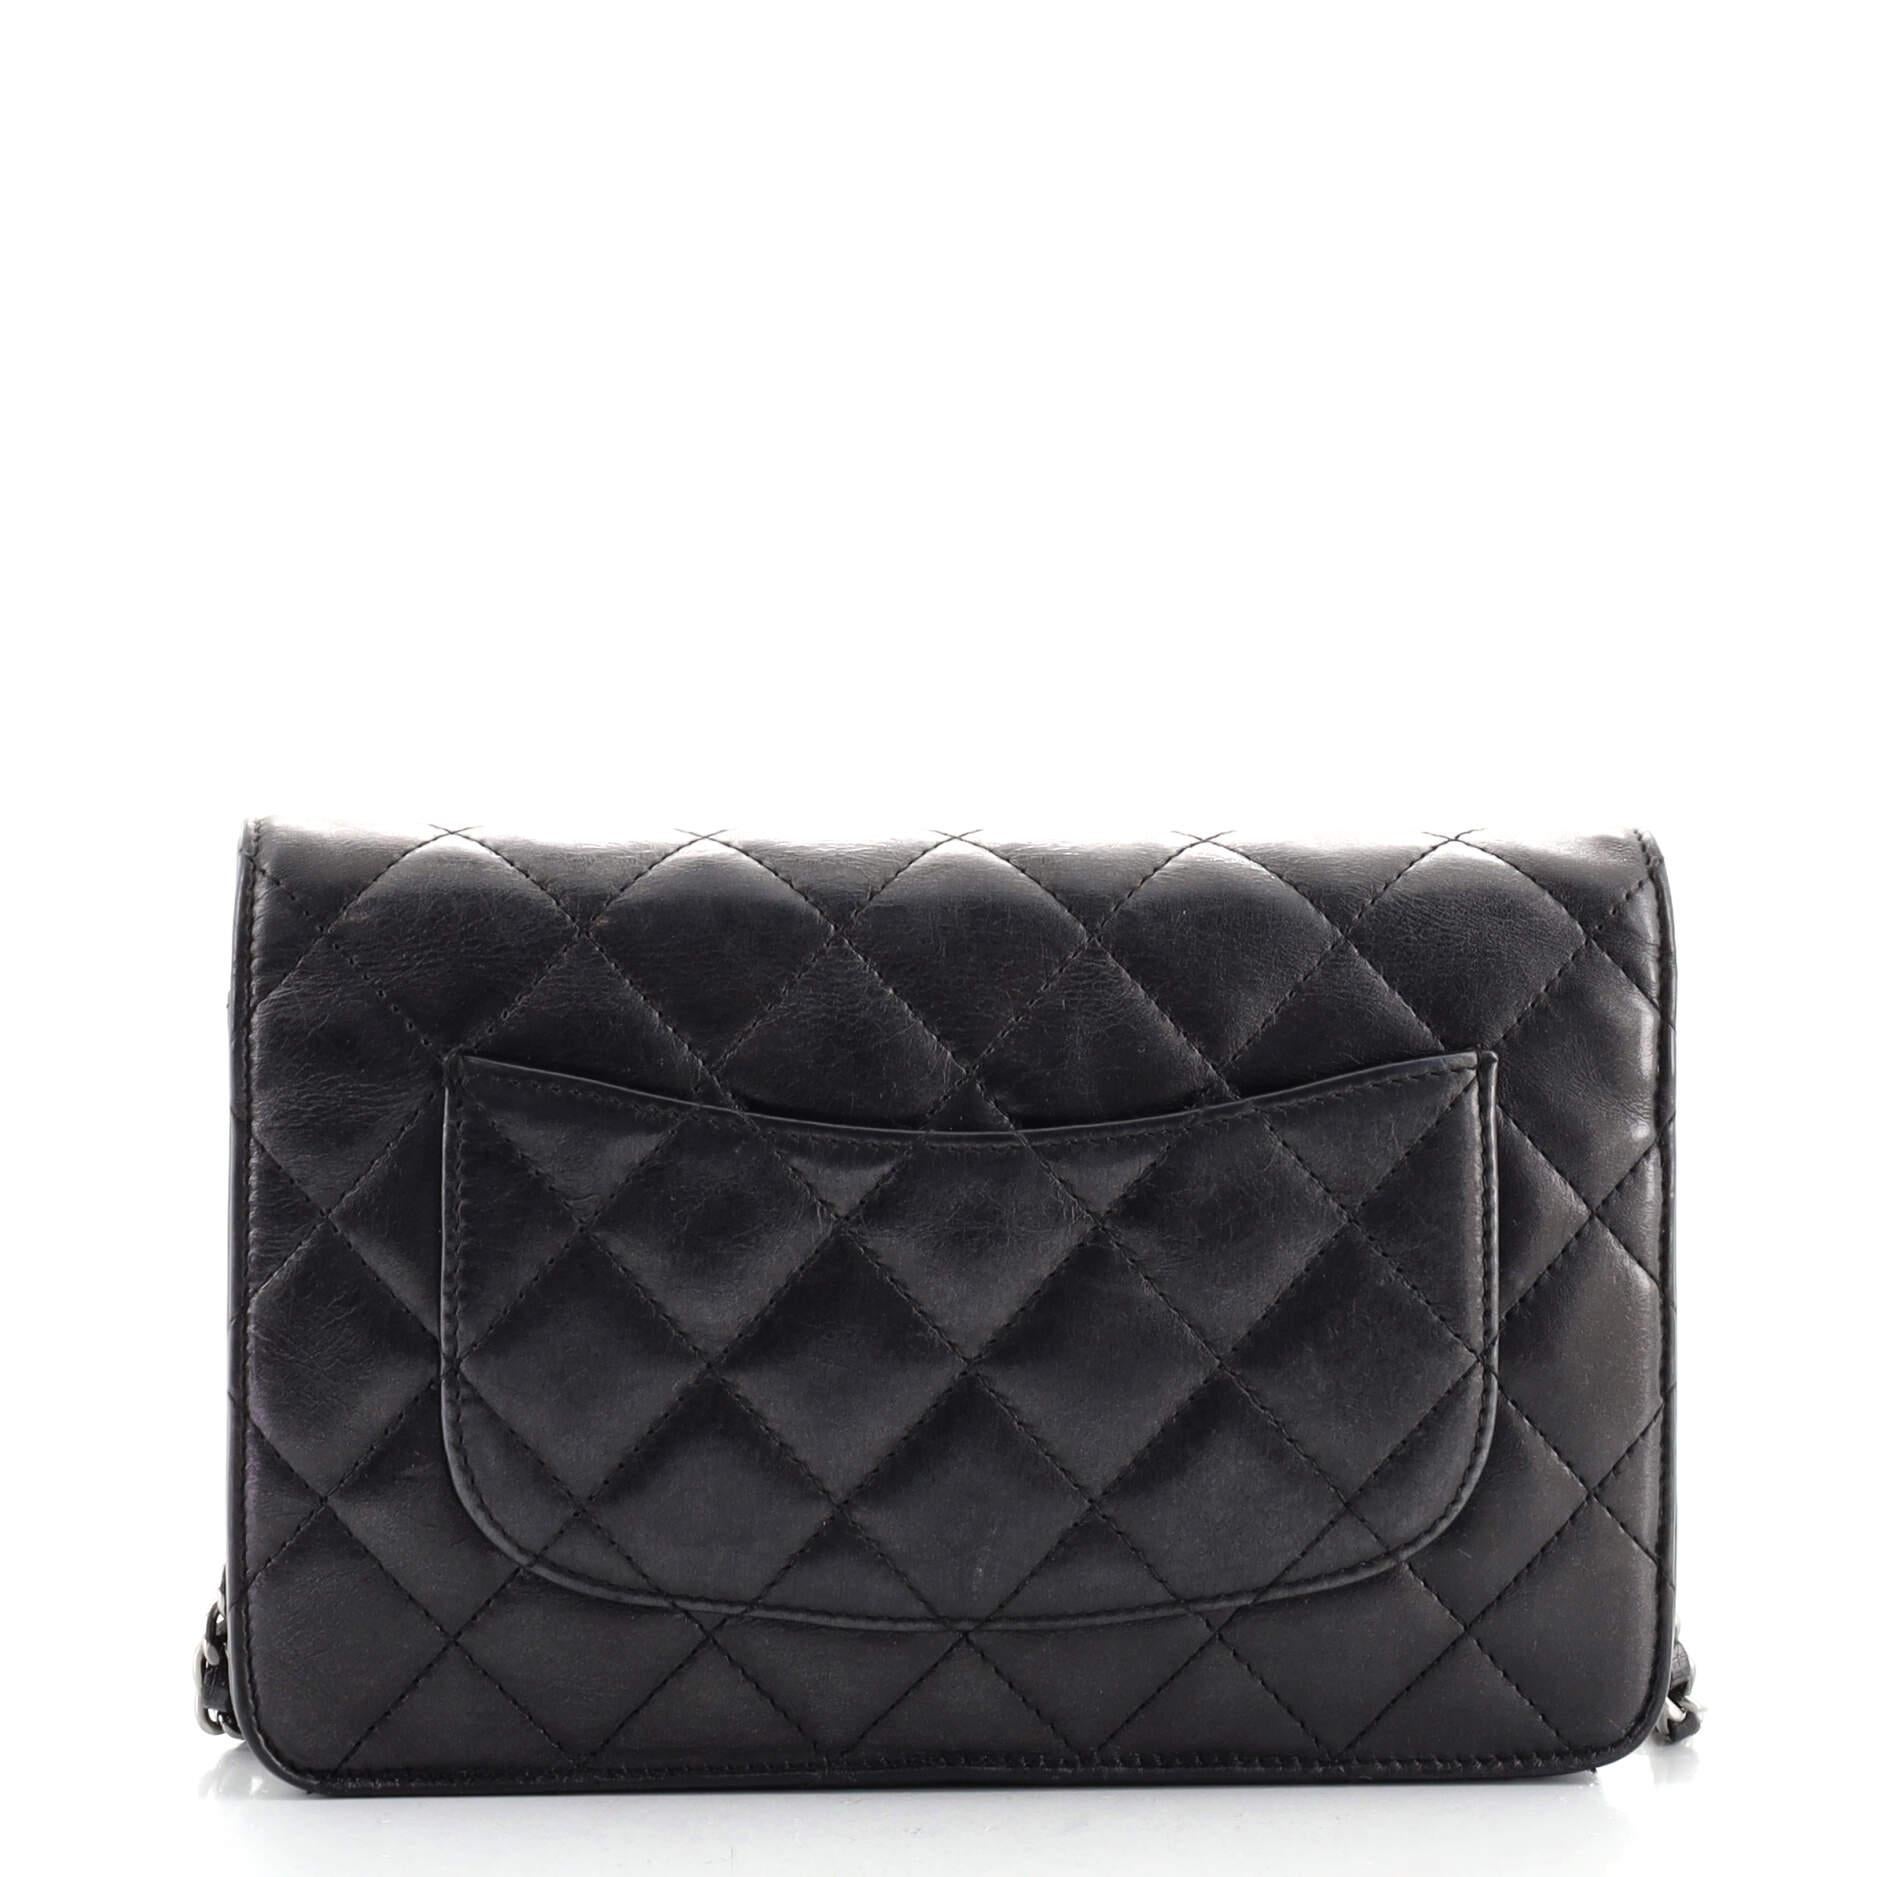 Black Chanel Reissue 2.55 Wallet on Chain Quilted Aged Calfskin